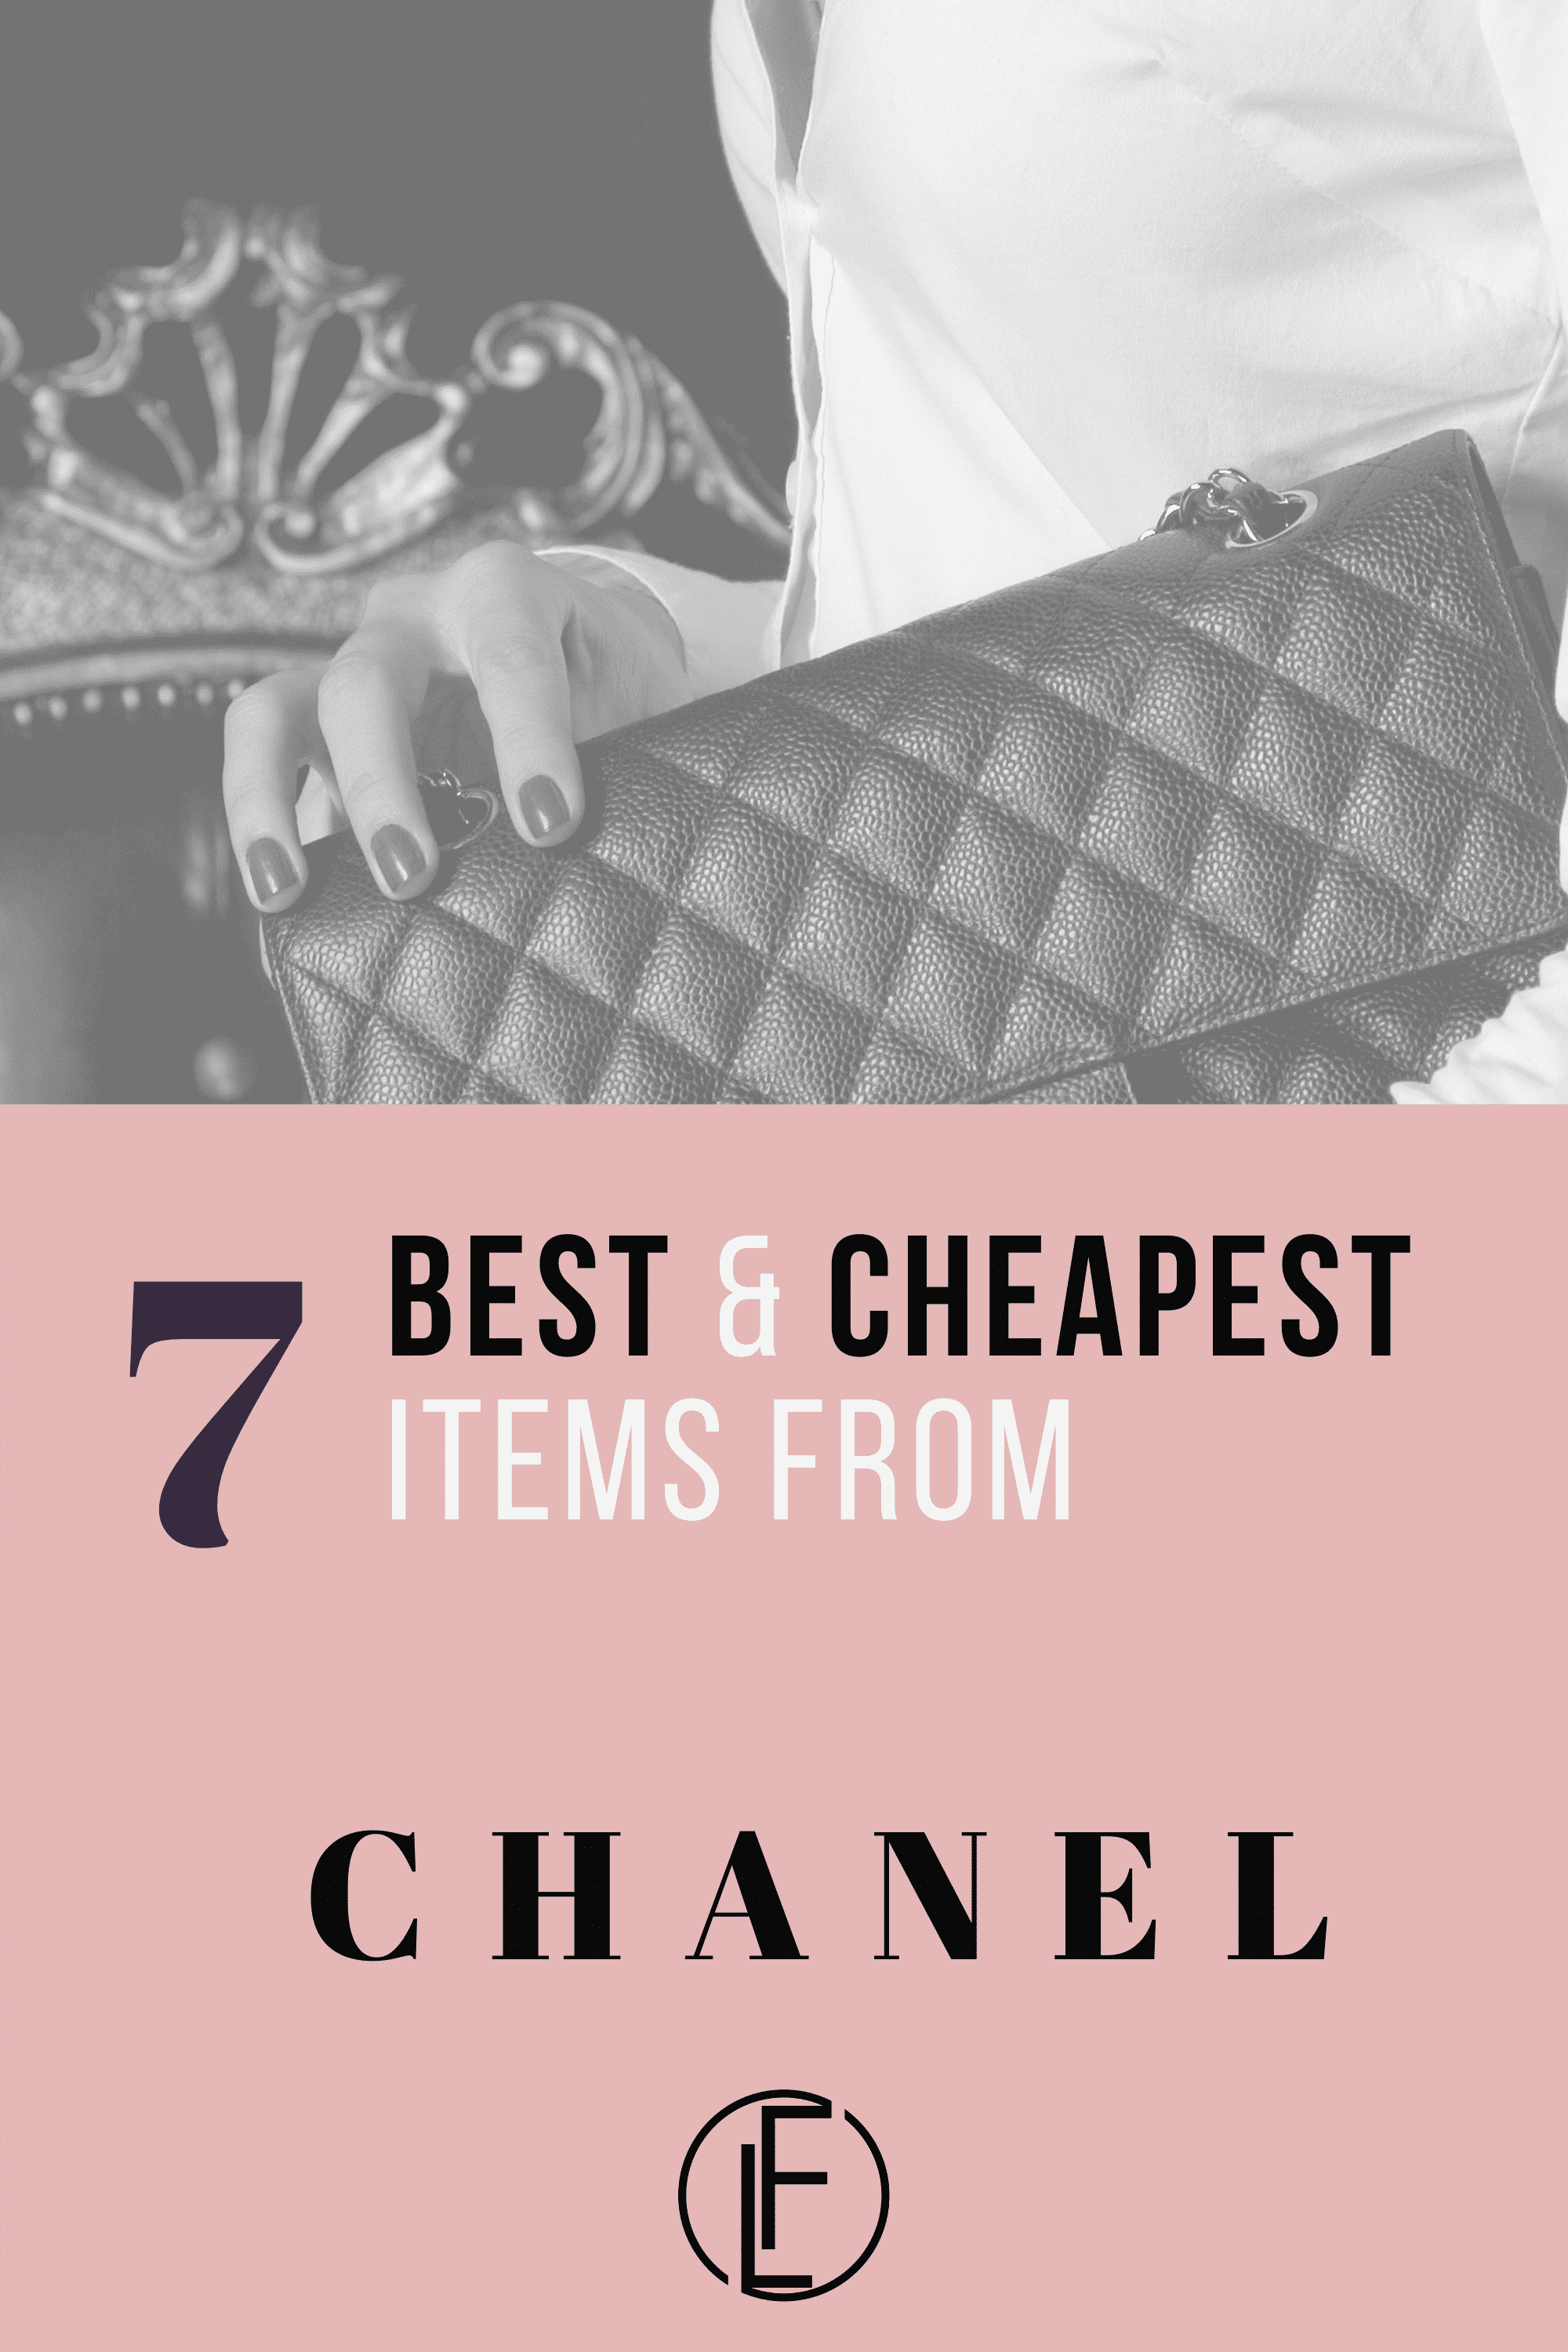 cheapest item from chanel